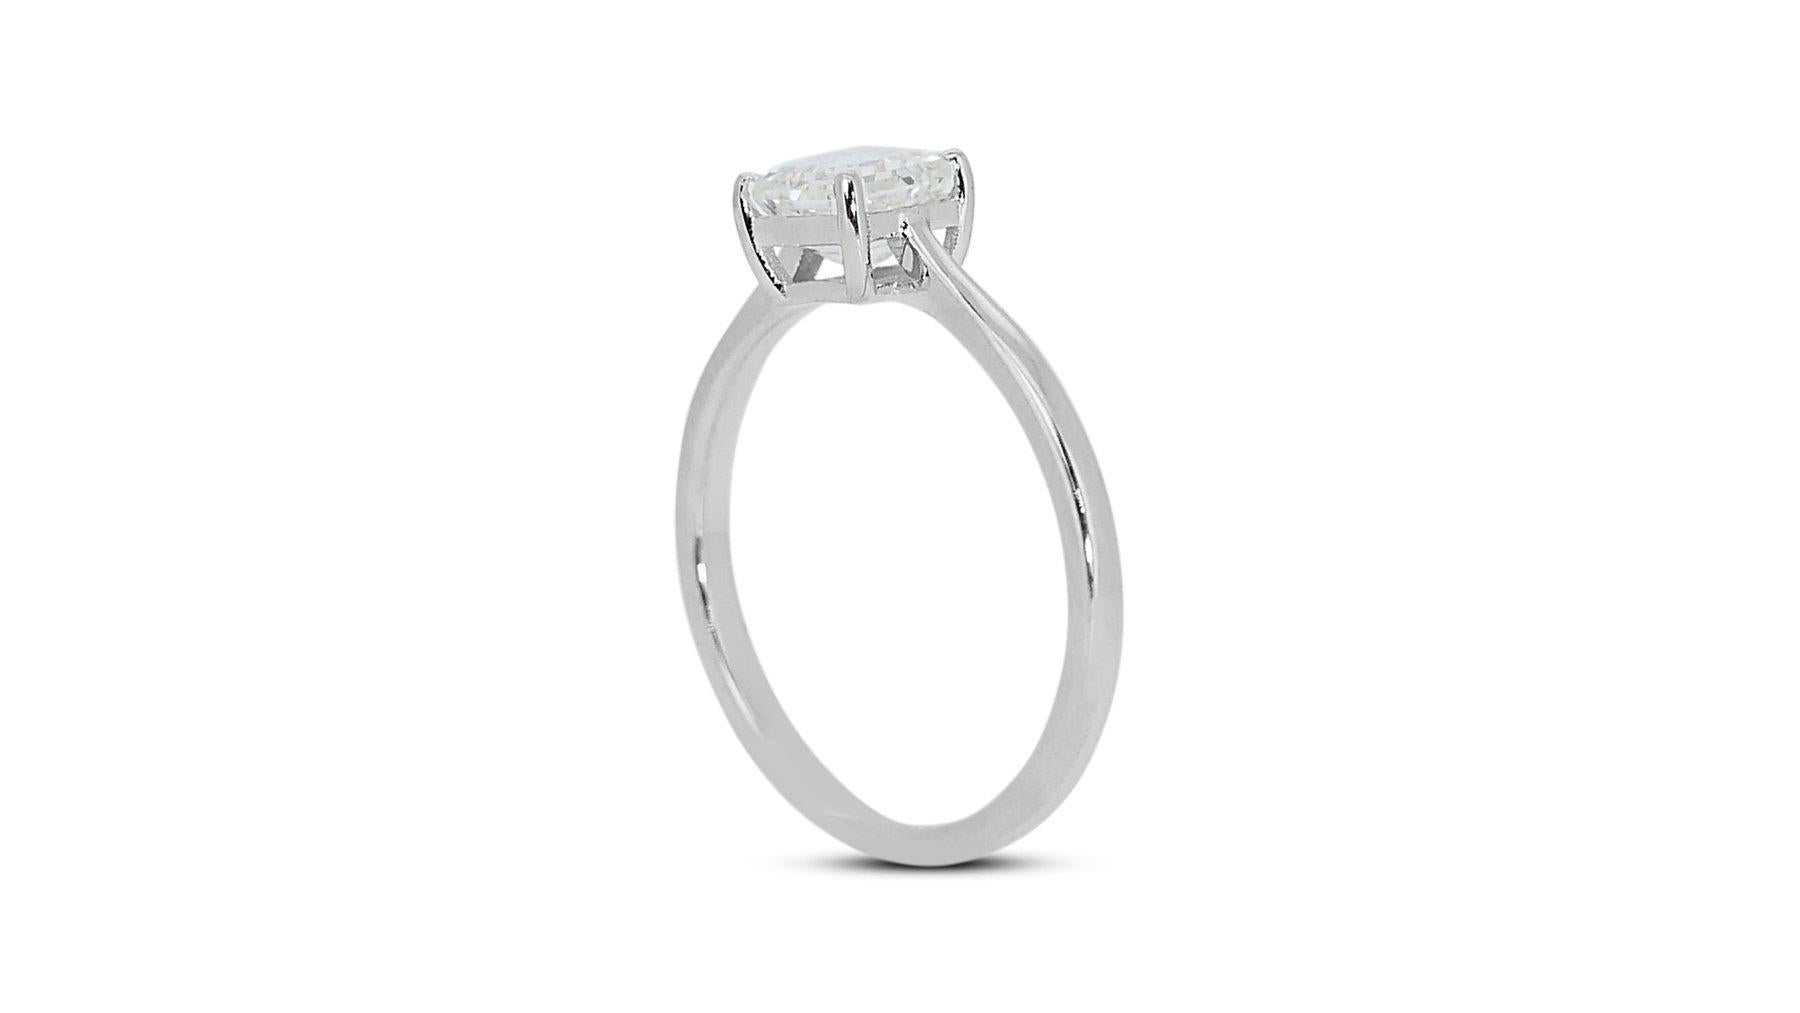 Square Cut Luminous 1.00ct Diamond Solitaire Ring in 18k White Gold - GIA Certified For Sale